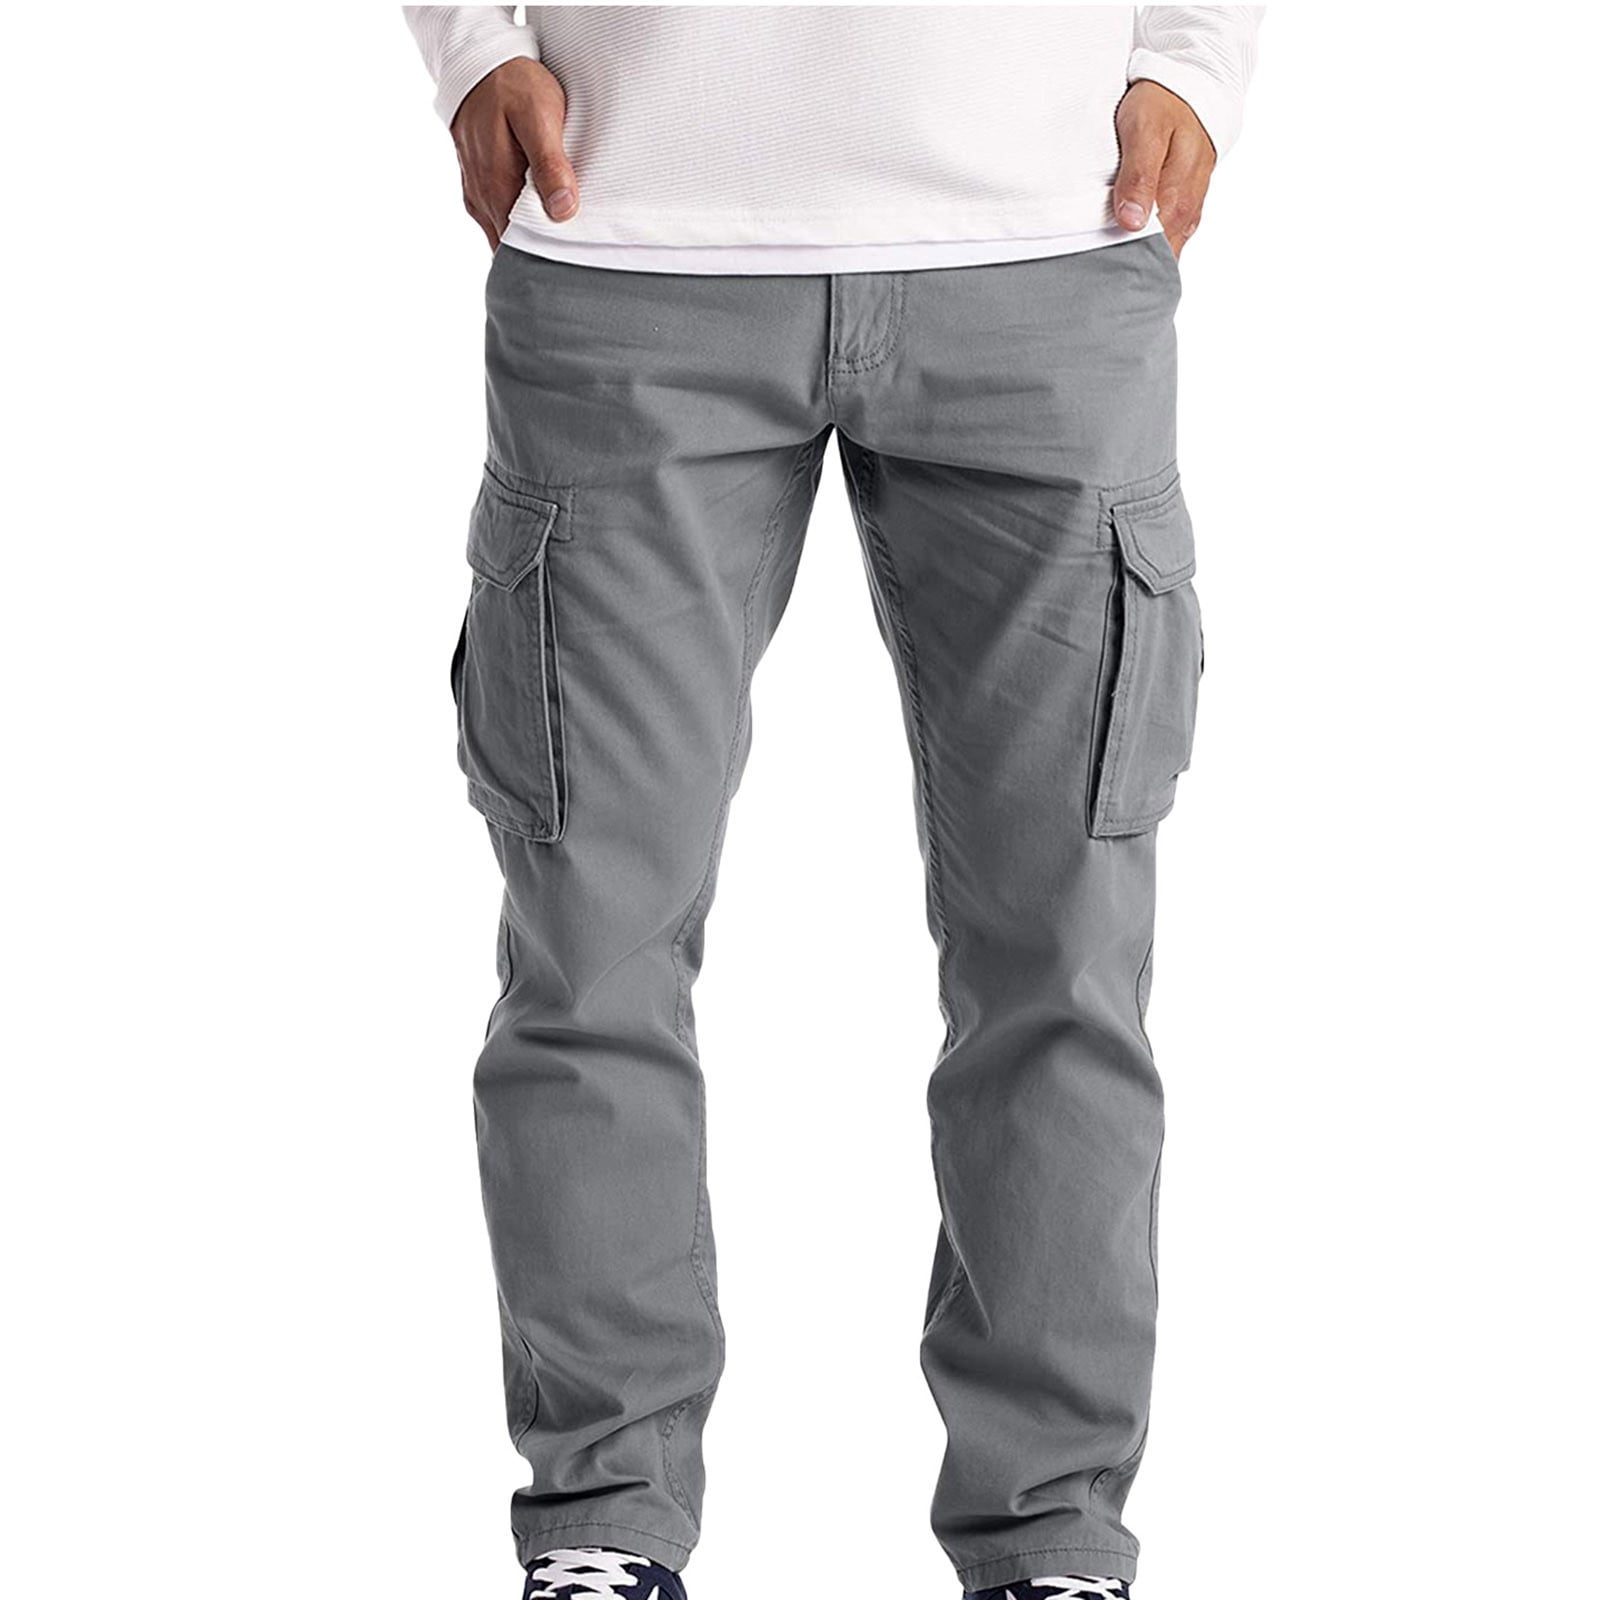 Mens Trousers Mens Work Casual Cargo Pants Utility & Safety